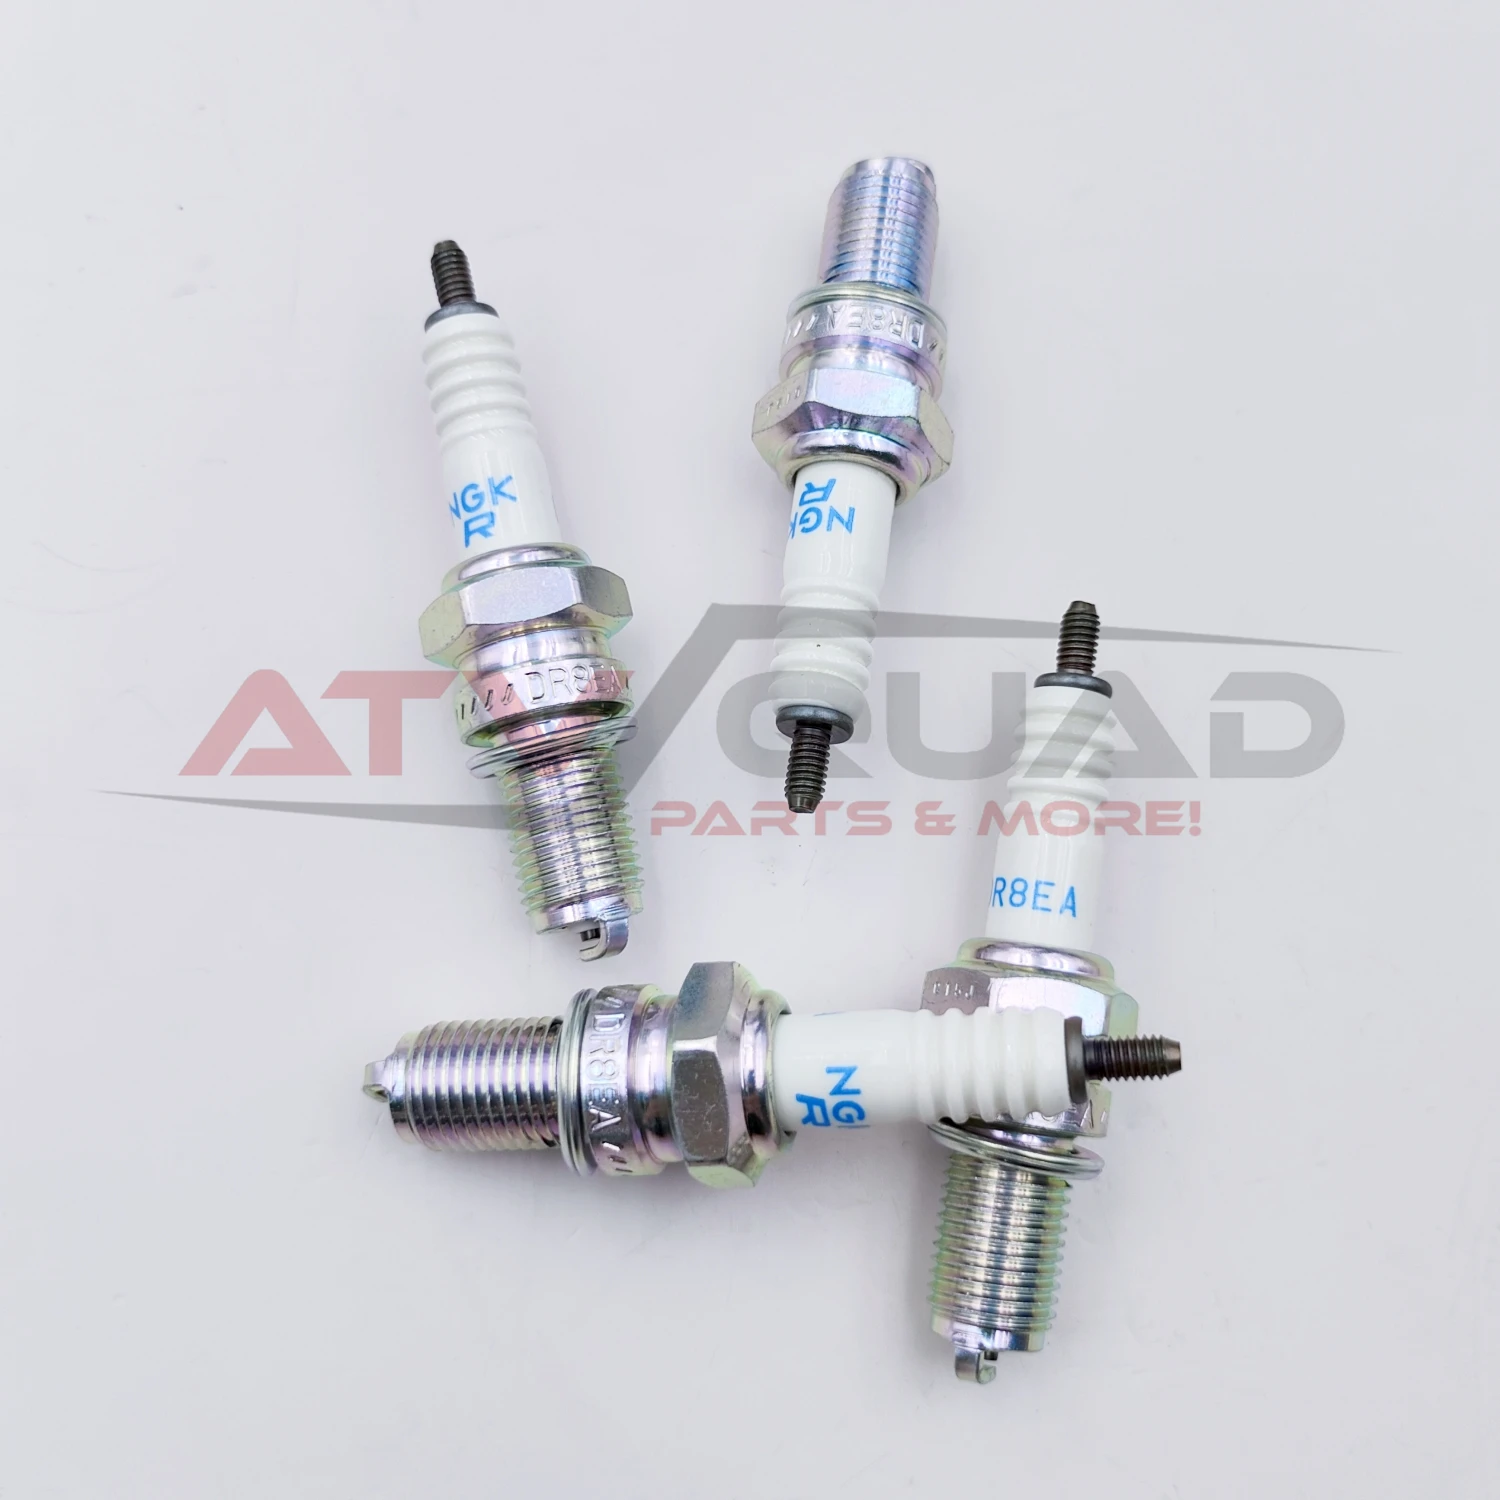 NGK DR8EA Spark Plug for Stels ATV 300B Buyang 300 Feishen FA-D300 H300 G300  2.1.01.0570 LU018894 one way clutch strater clutch for stels atv 300b buyang 300 feishen fa d300 g300 h300 2 1 01 0290 lu020048